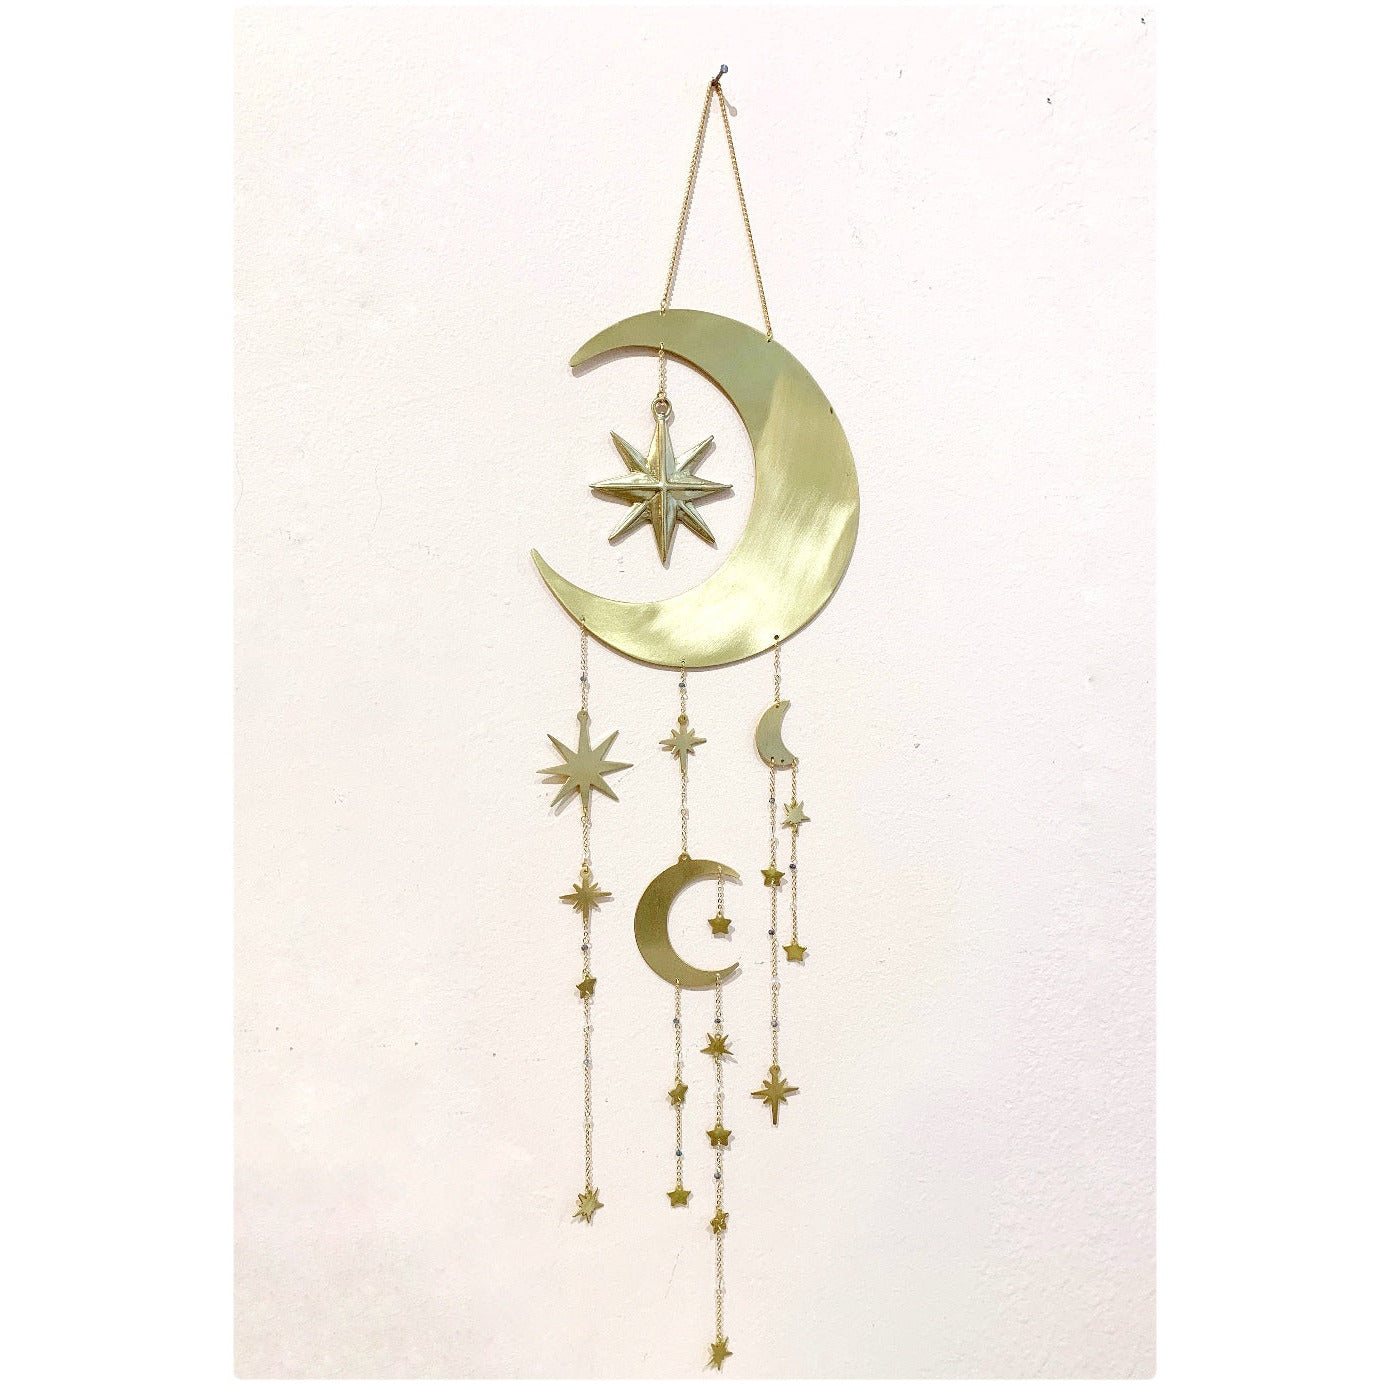 Starry Night Celestial Moon and Star Dreamcatcher by Ariana Ost